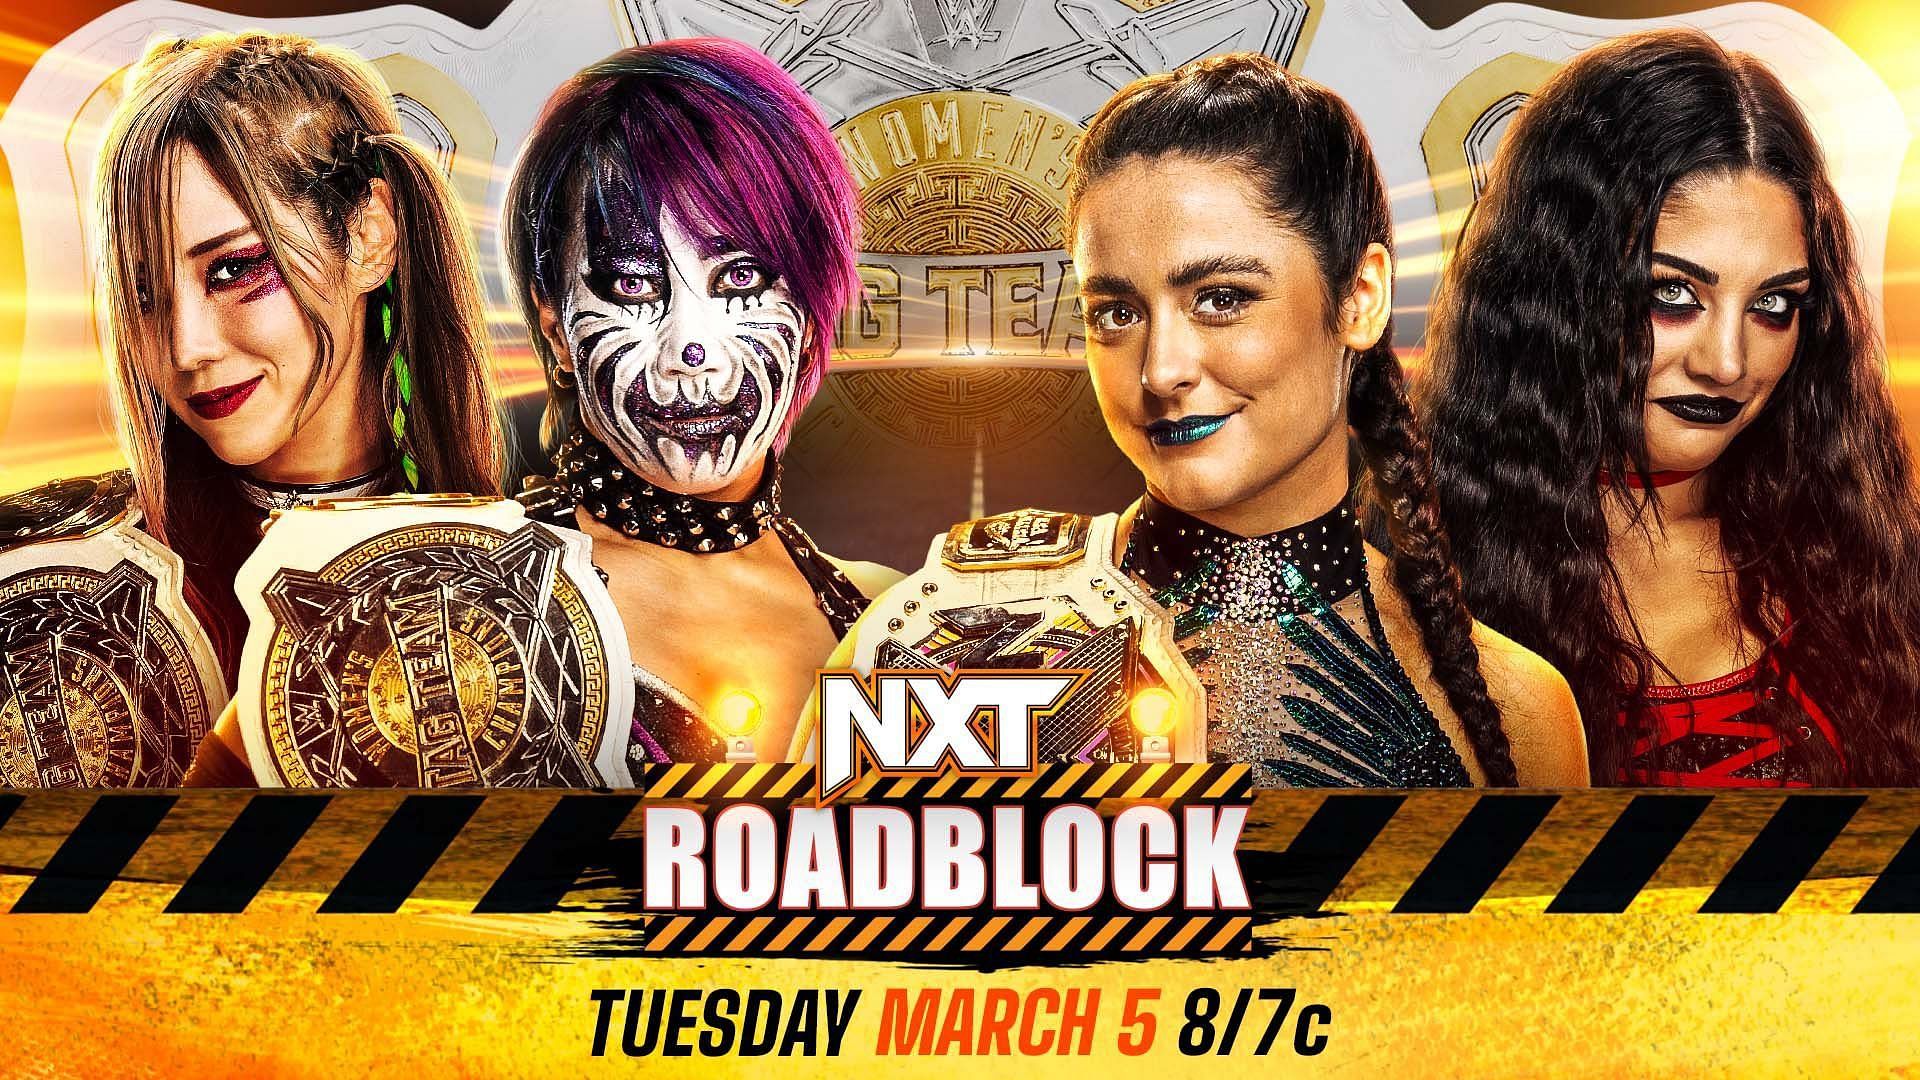 Will Lyra Valkyria become &#039;Lyra Two Belts&#039; at NXT Roadblock?